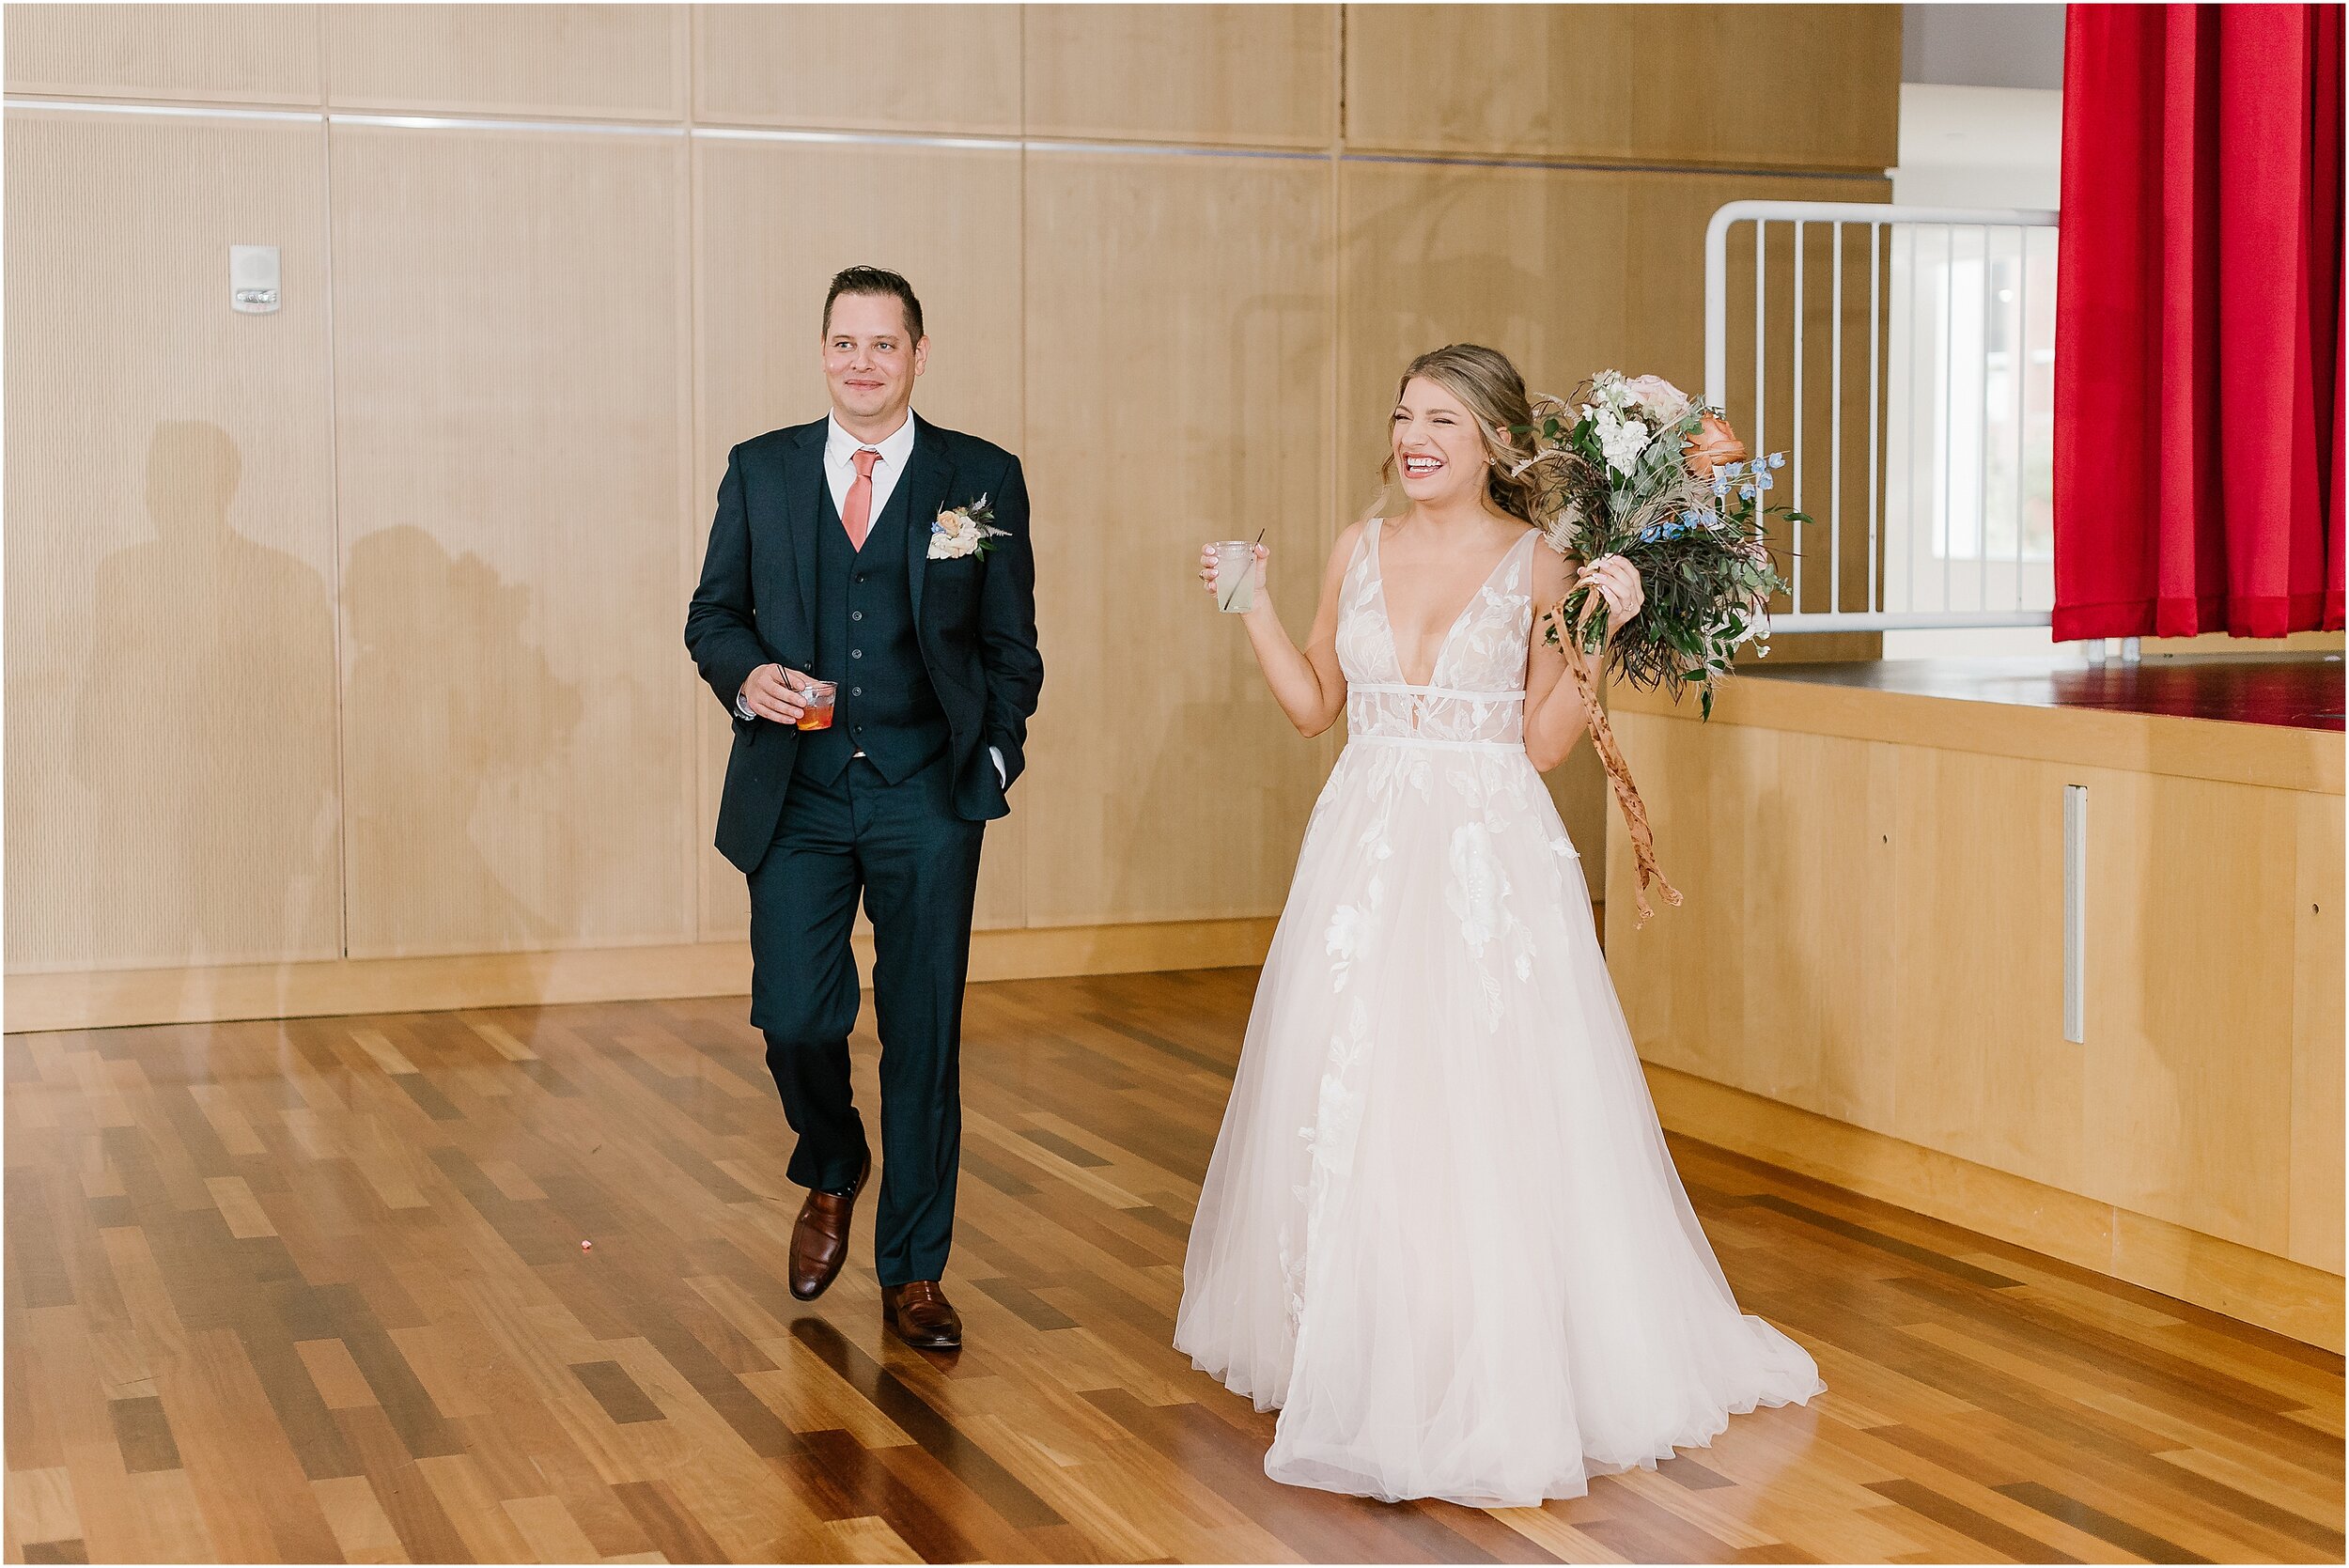 Rebecca Shehorn Photography Colleen and Kyle Inn at Irwin Gardens Wedding-819_The Commons Columbus Inn at Irwin Garden Indianapolis Wedding Photographer.jpg